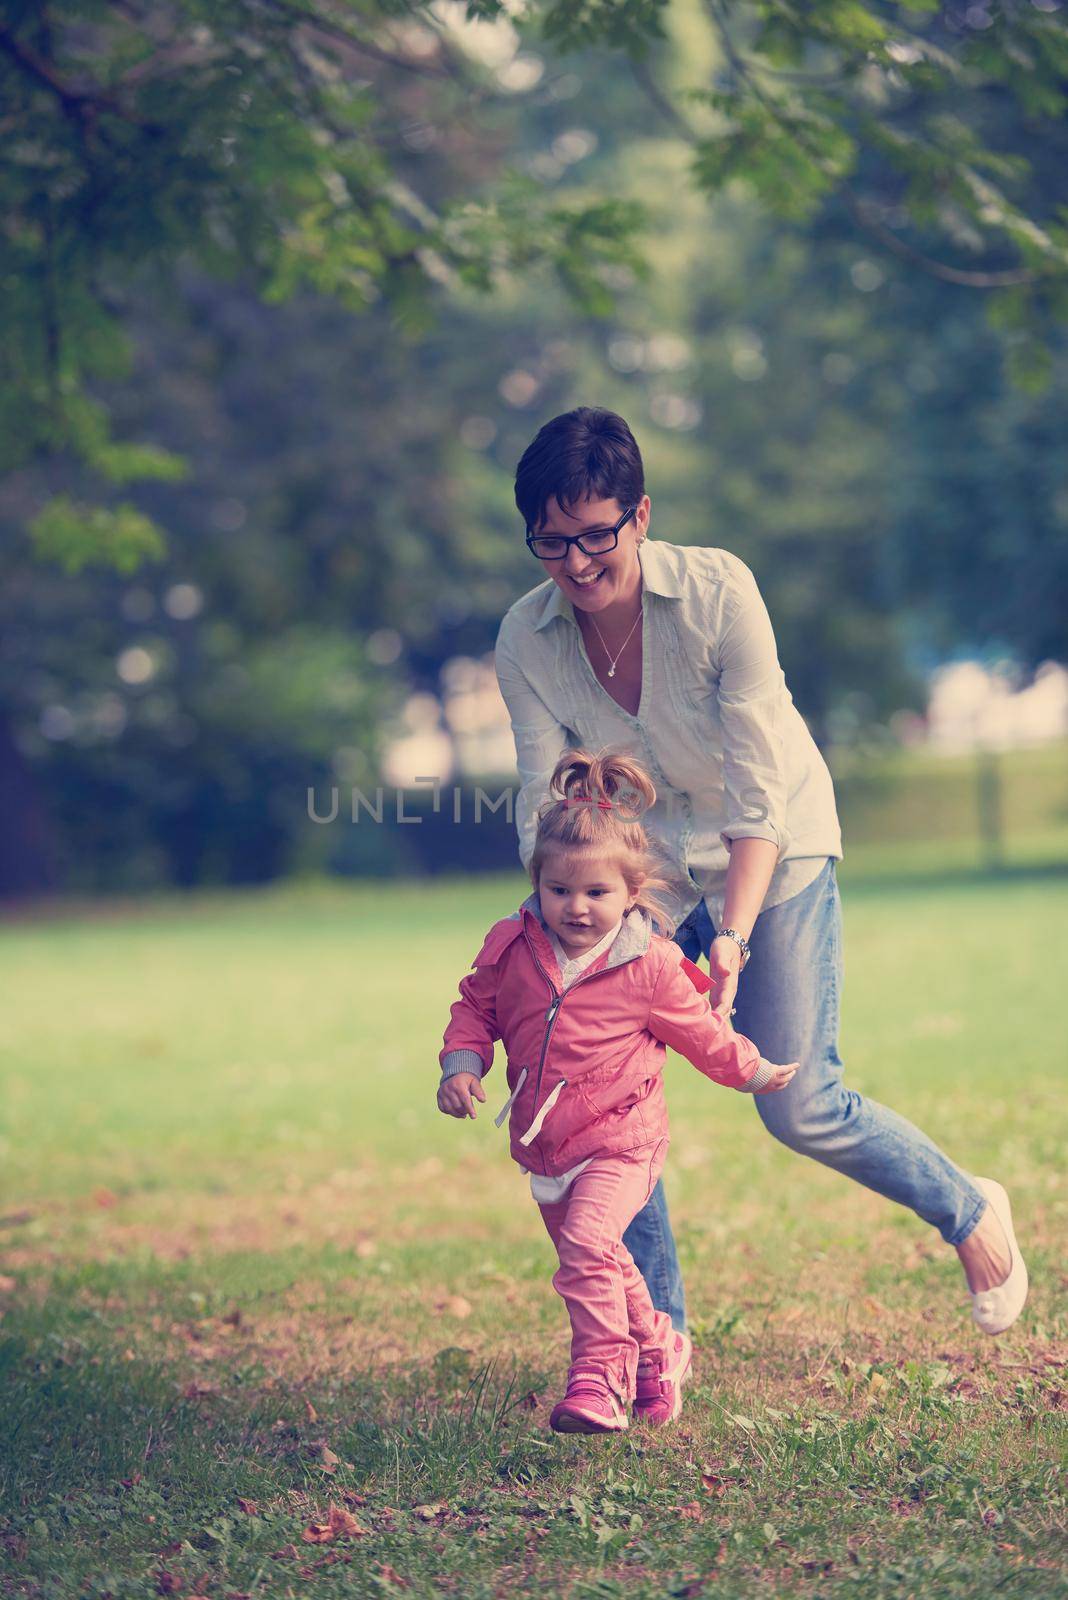 happy family playing together outdoor  in park mother with kids  running on grass